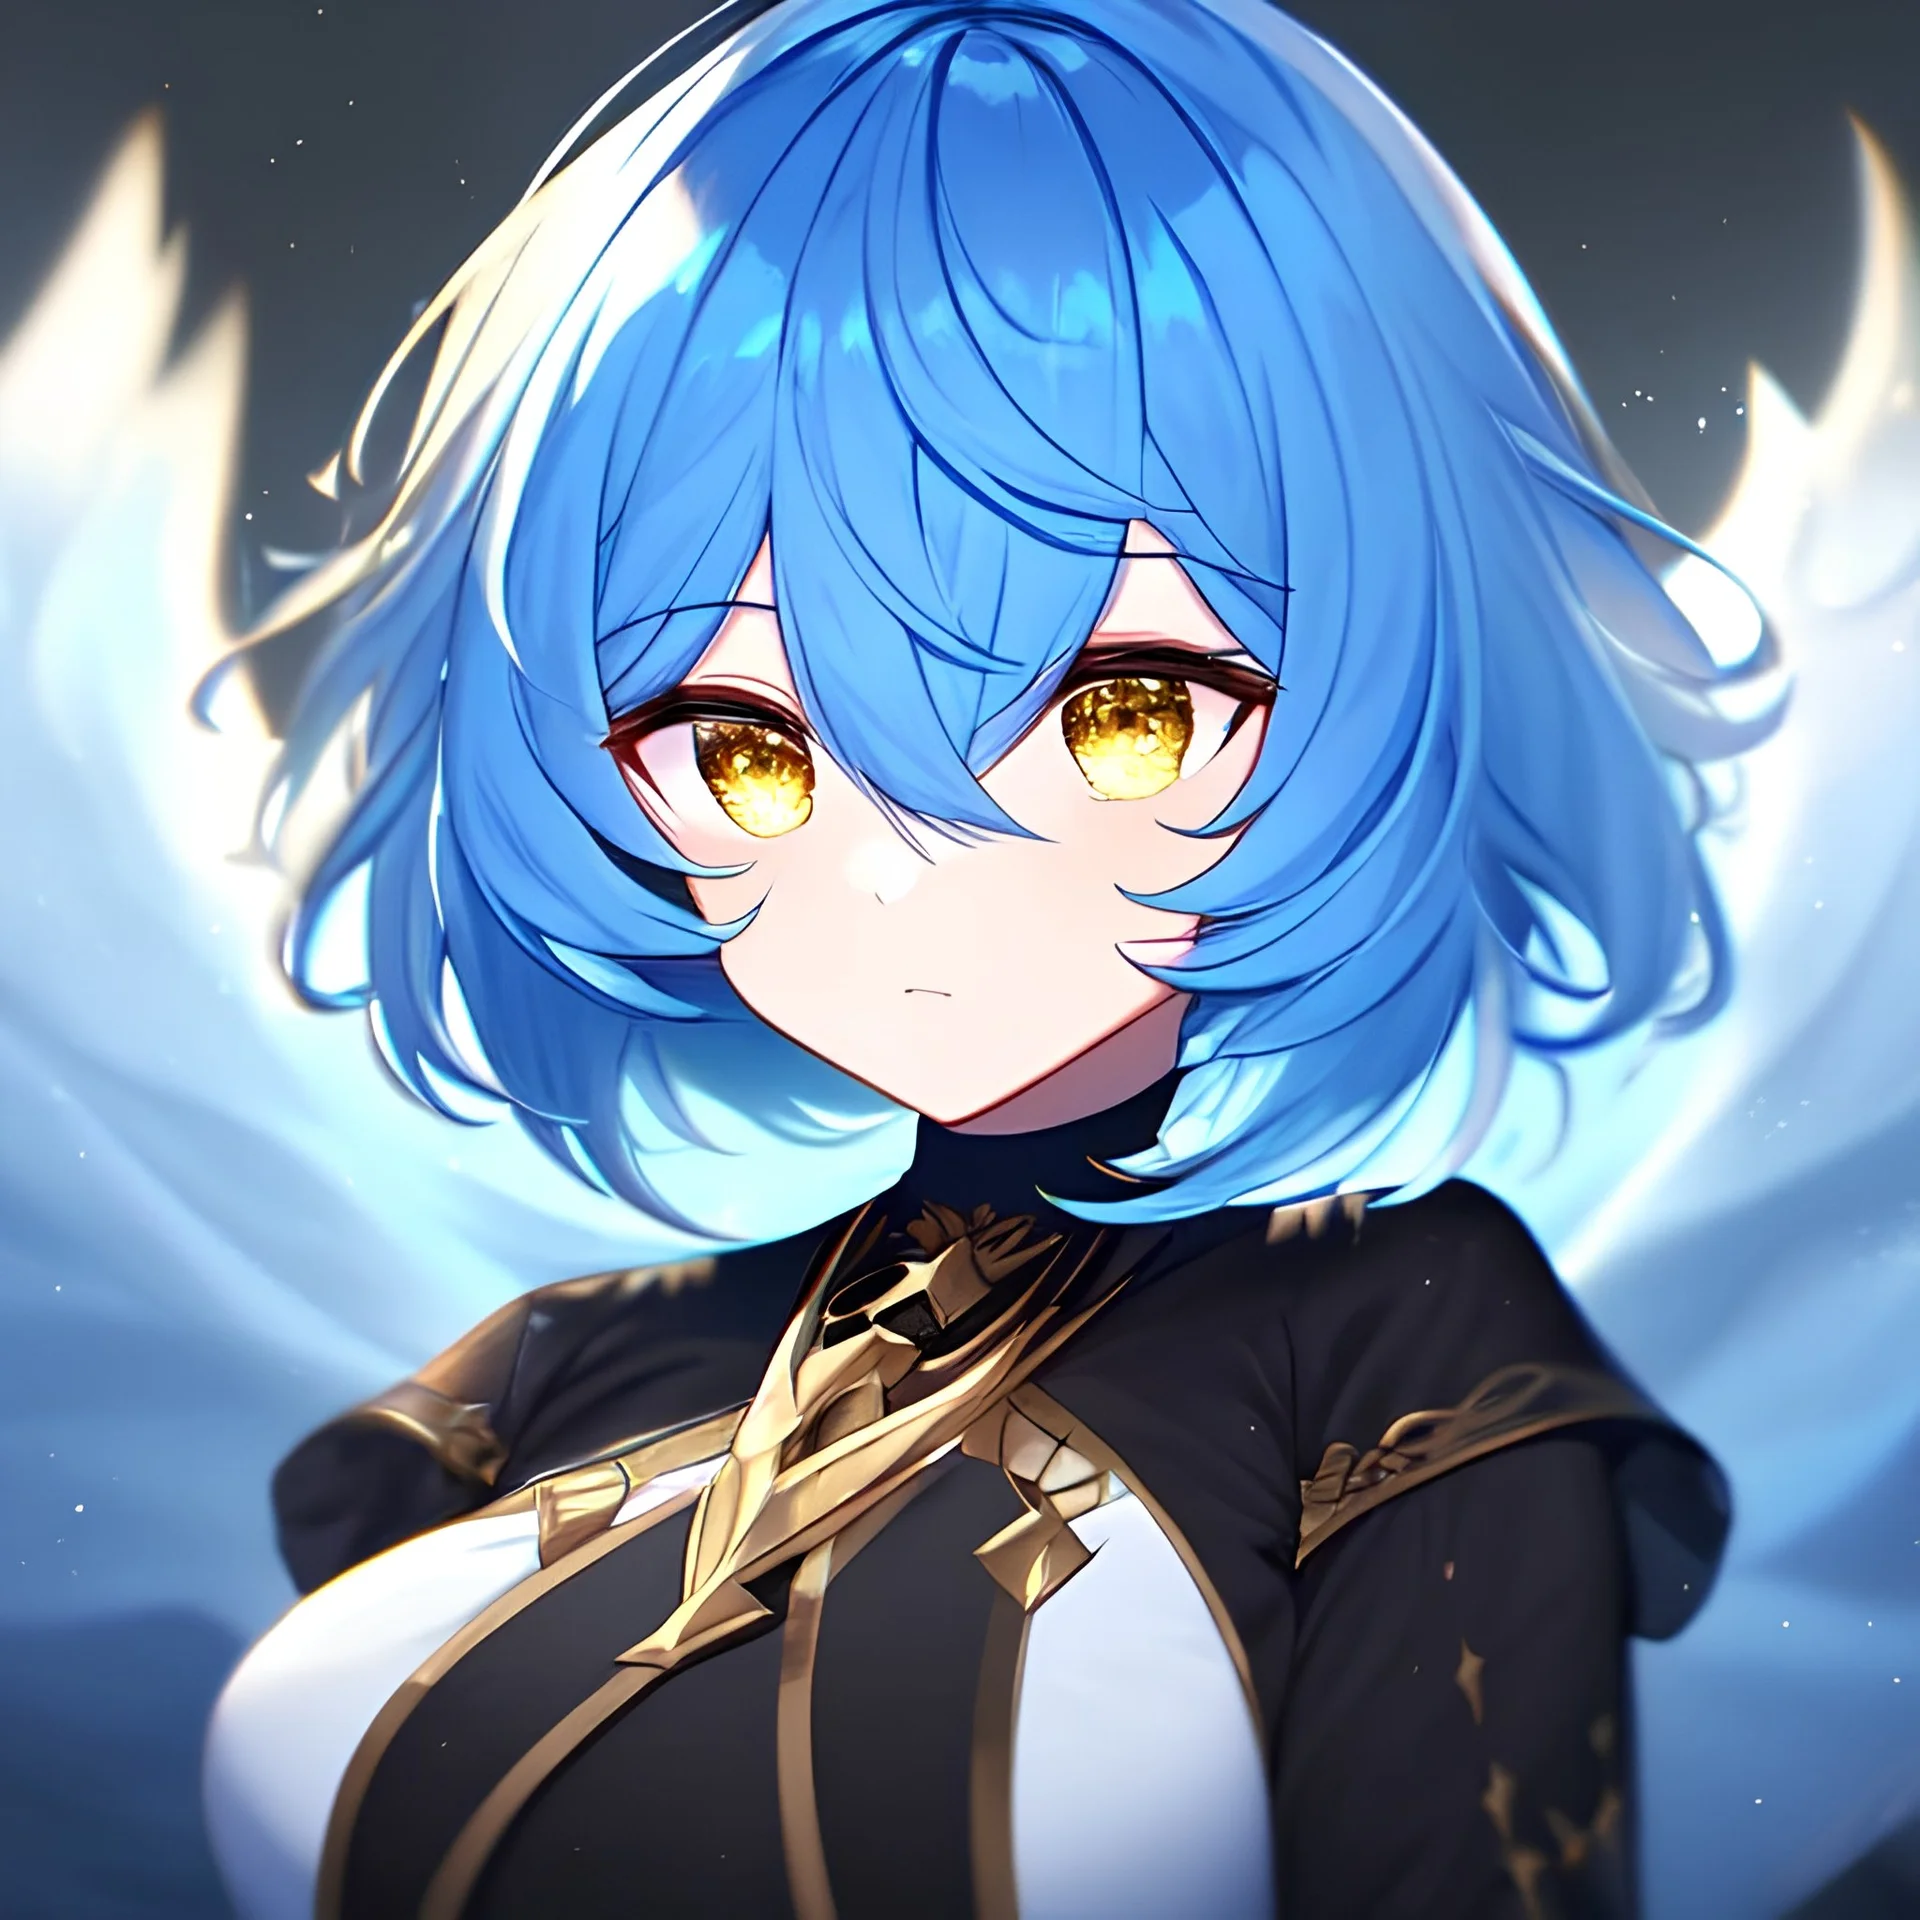 Clear focus, High resolution, short light blue fluffy hair, hair between eyes, yellow eyes, wearing black magma shorts, detailed outfit, blue and black outfit, gold accessory, female